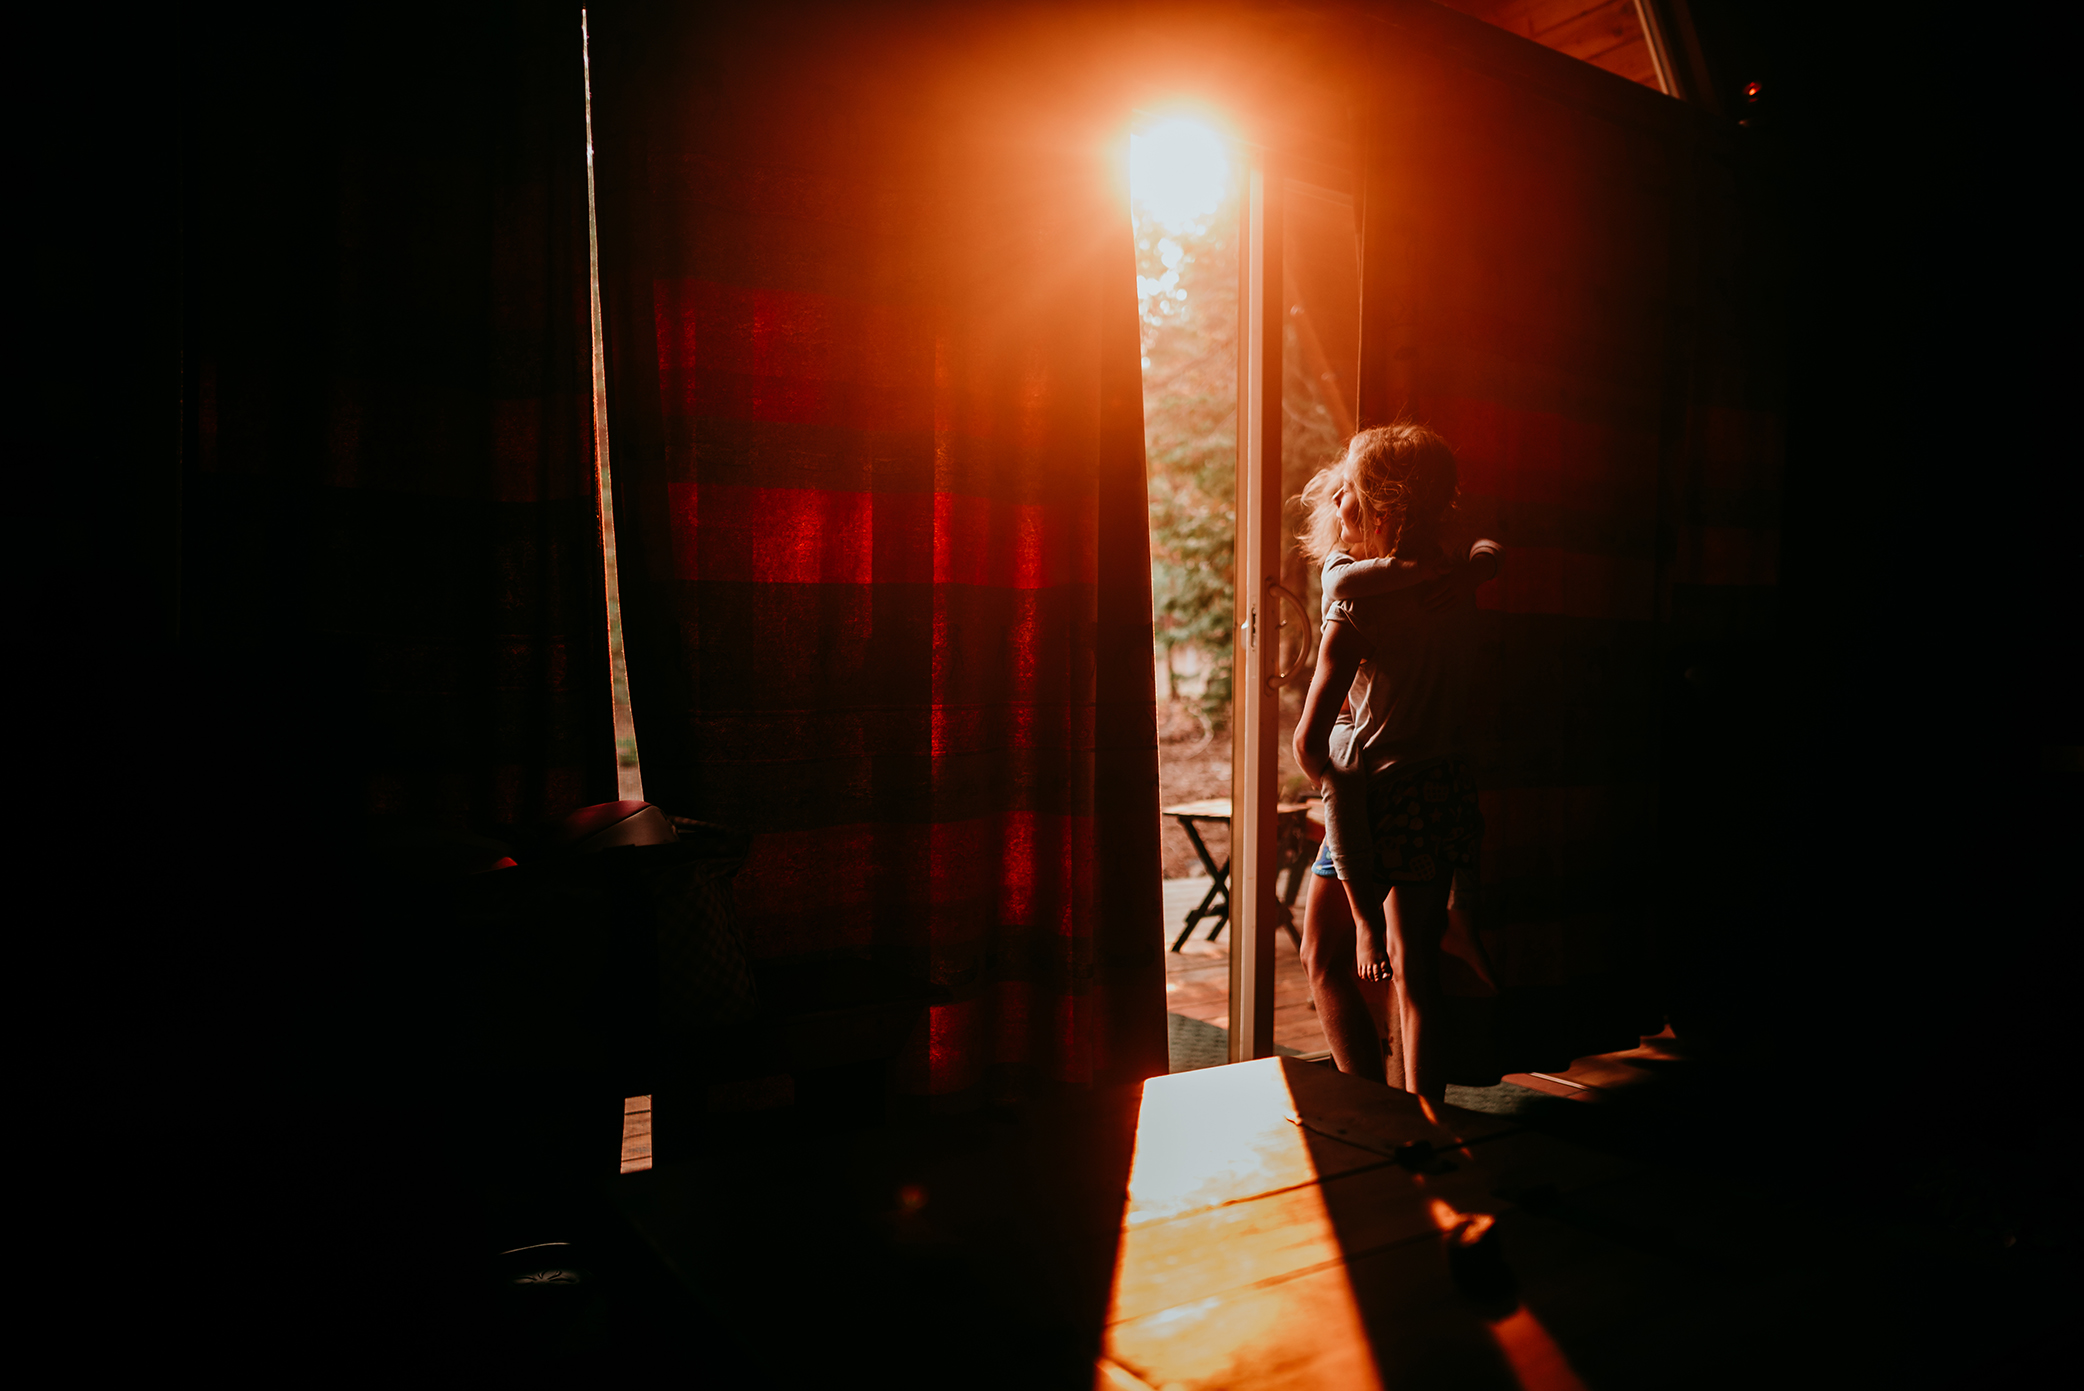 Little girl looking into the morning sun from cabin